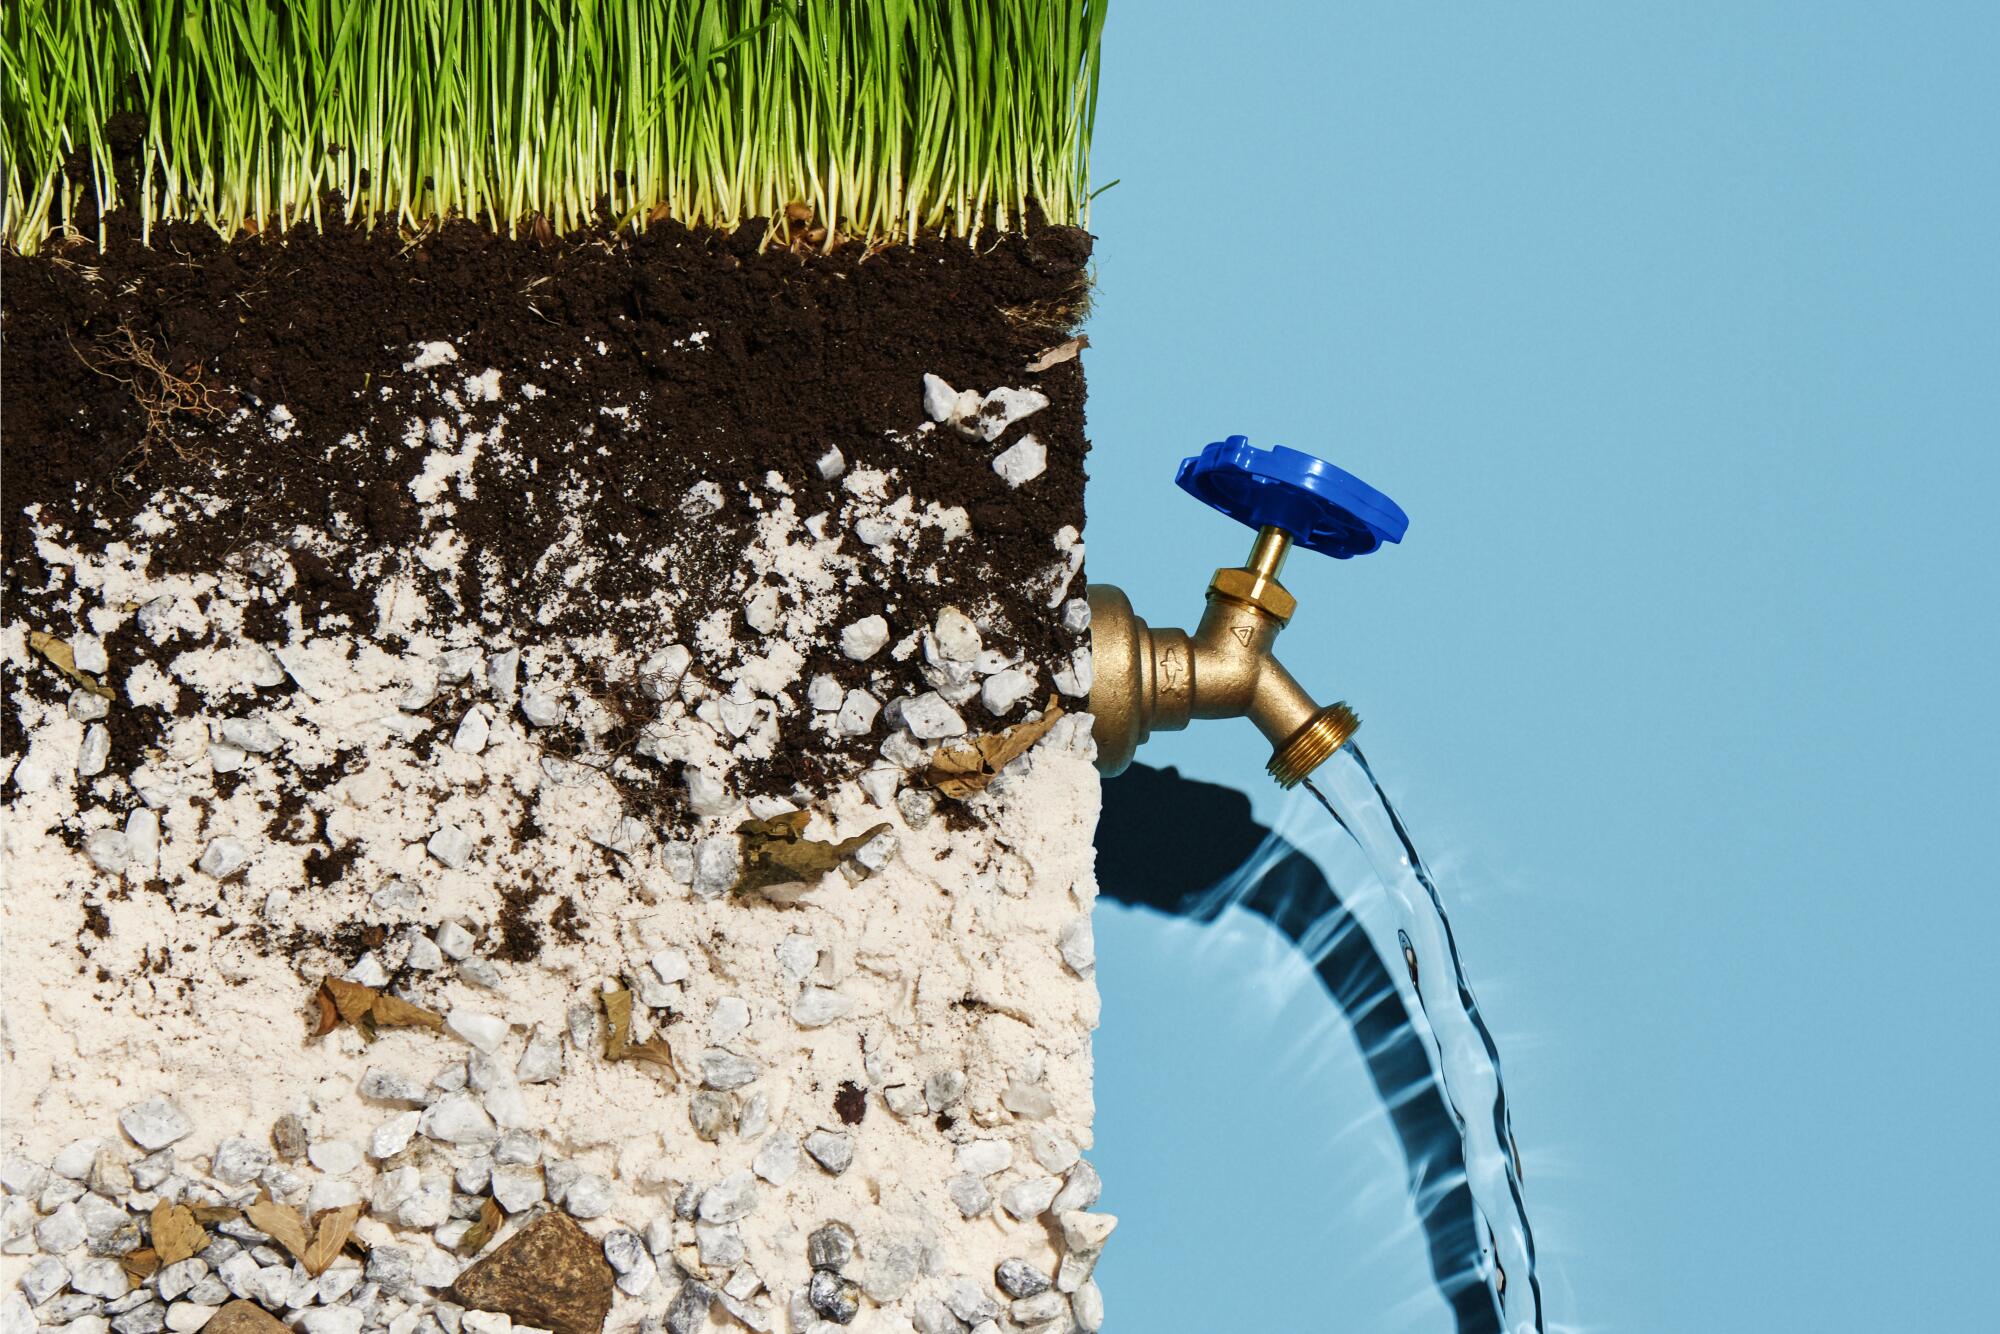 Photo illustration of a hose faucet on a blue background pouring water on the right, with dirt, grass and rocks on the left.